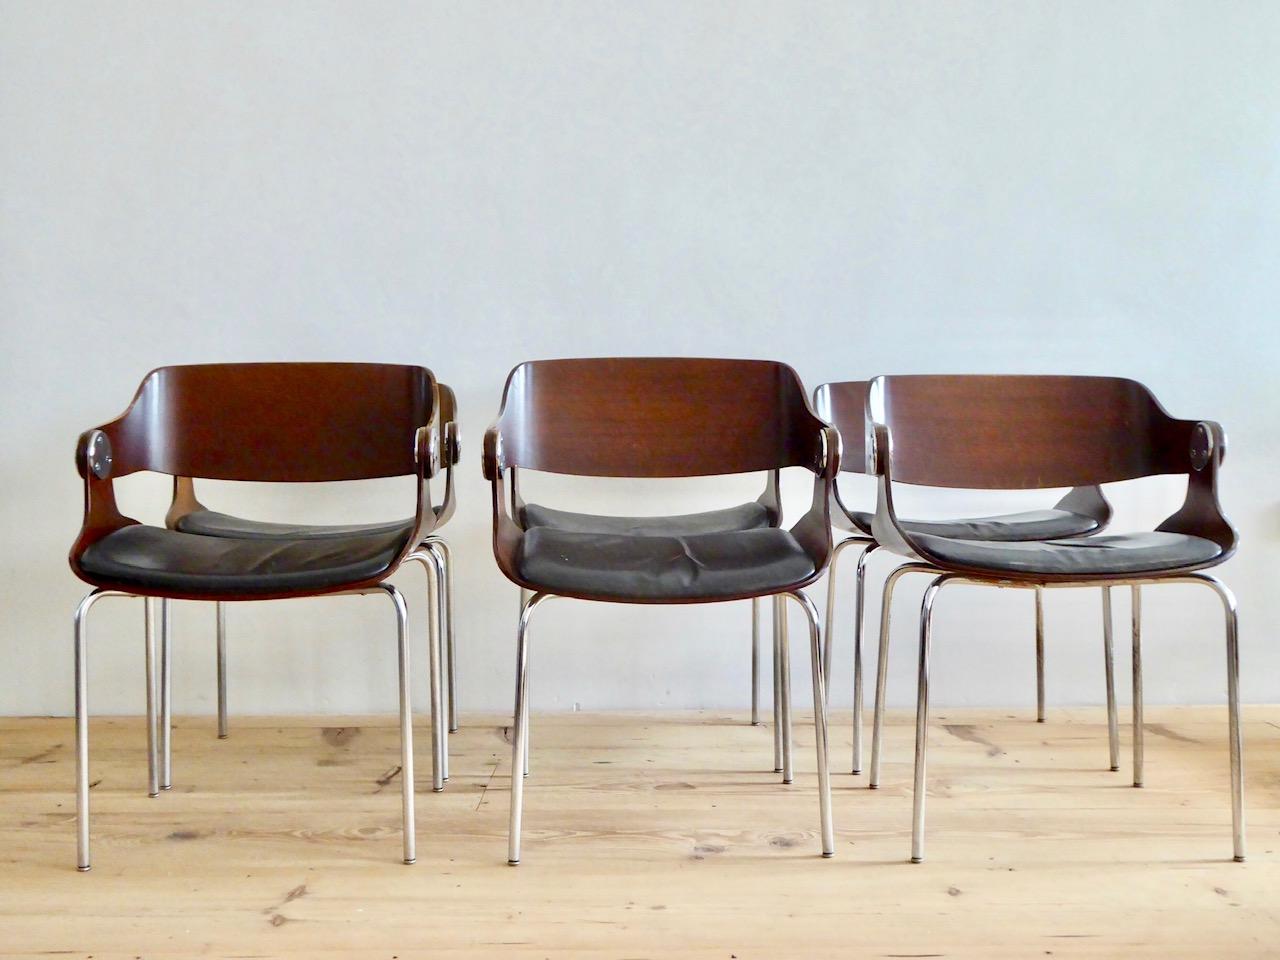 These armchairs were designed and manufactured 1966 by German architect Eugen Schmidt for exclusive surroundings. The chairs feature plywood seats and backs, a chromed metal base and original black leather upholstery seats.